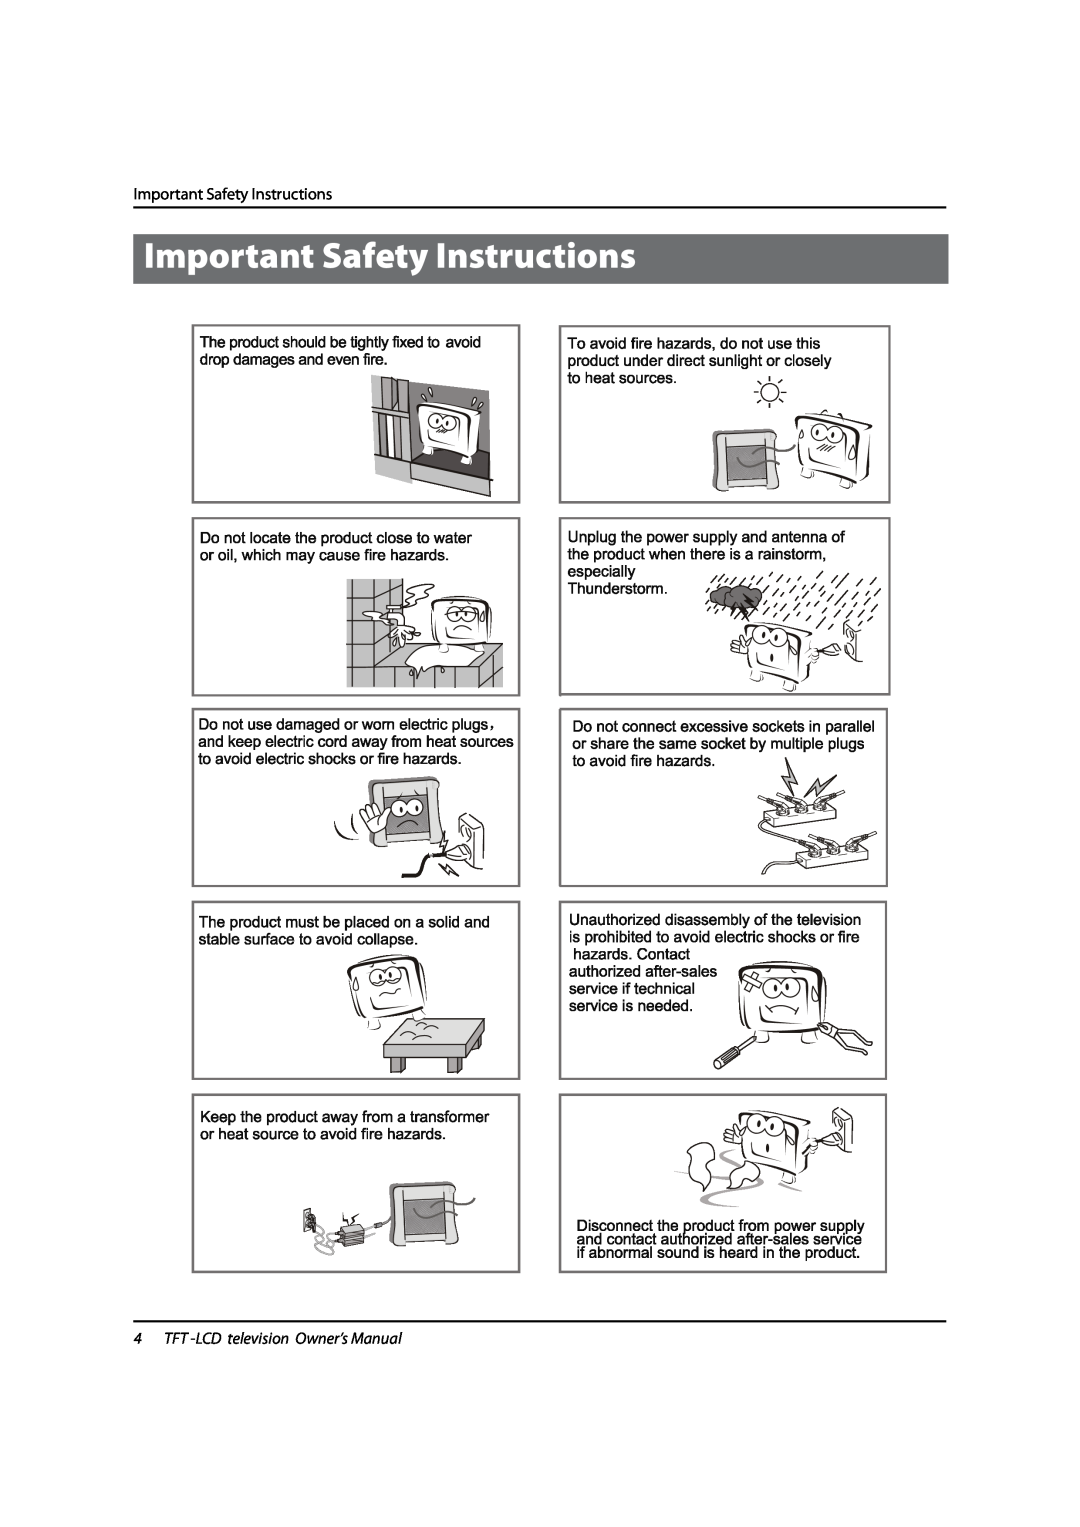 Marshall electronic ME-4220, ME-3220 manual Important Safety Instructions, TFT -LCD television Owner’s Manual 